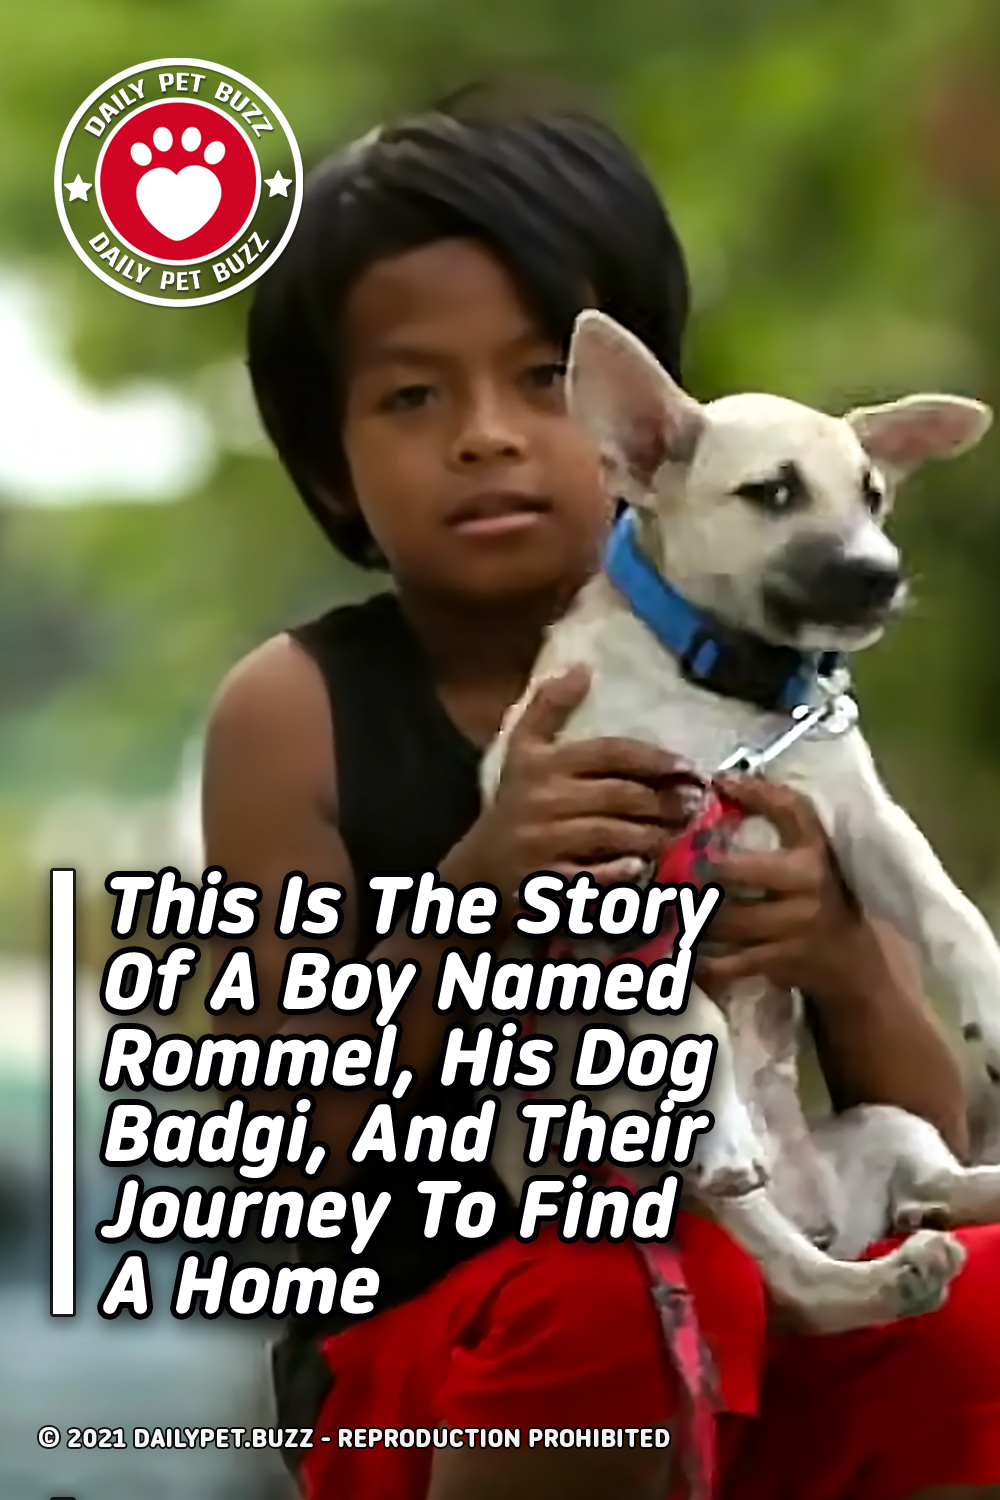 This Is The Story Of A Boy Named Rommel, His Dog Badgi, And Their Journey To Find A Home